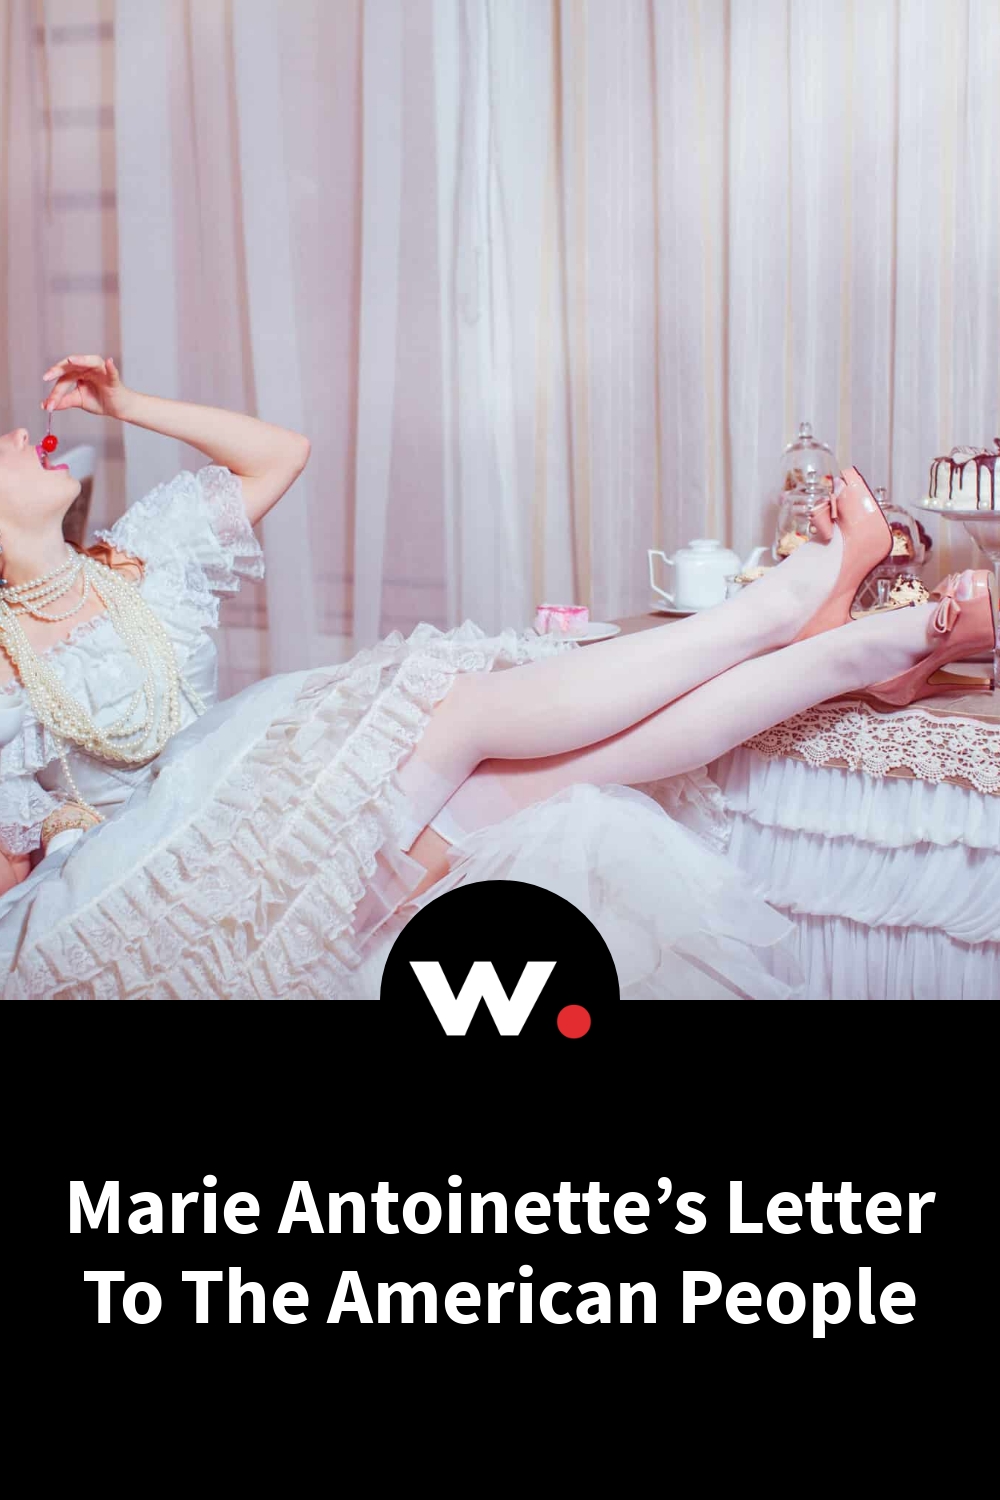 Marie Antoinette’s Letter To The American People